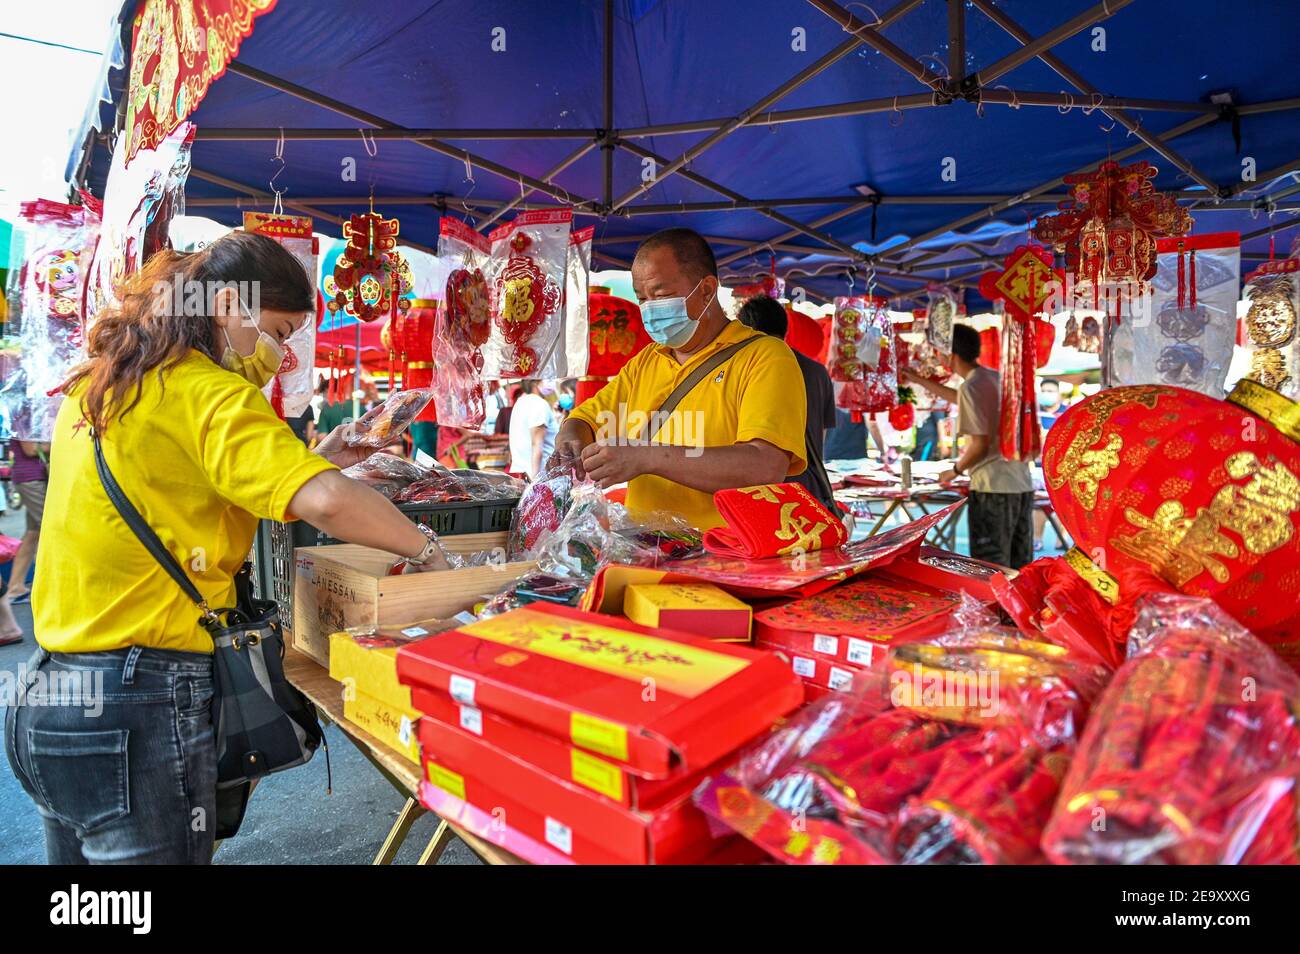 Kuala Lumpur, Malaysia. 6th Feb, 2021. People wearing face masks shop for Chinese New Year decorations at a market in Klang of Selangor state, Malaysia, Feb. 6, 2021. Credit: Chong Voon Chung/Xinhua/Alamy Live News Stock Photo